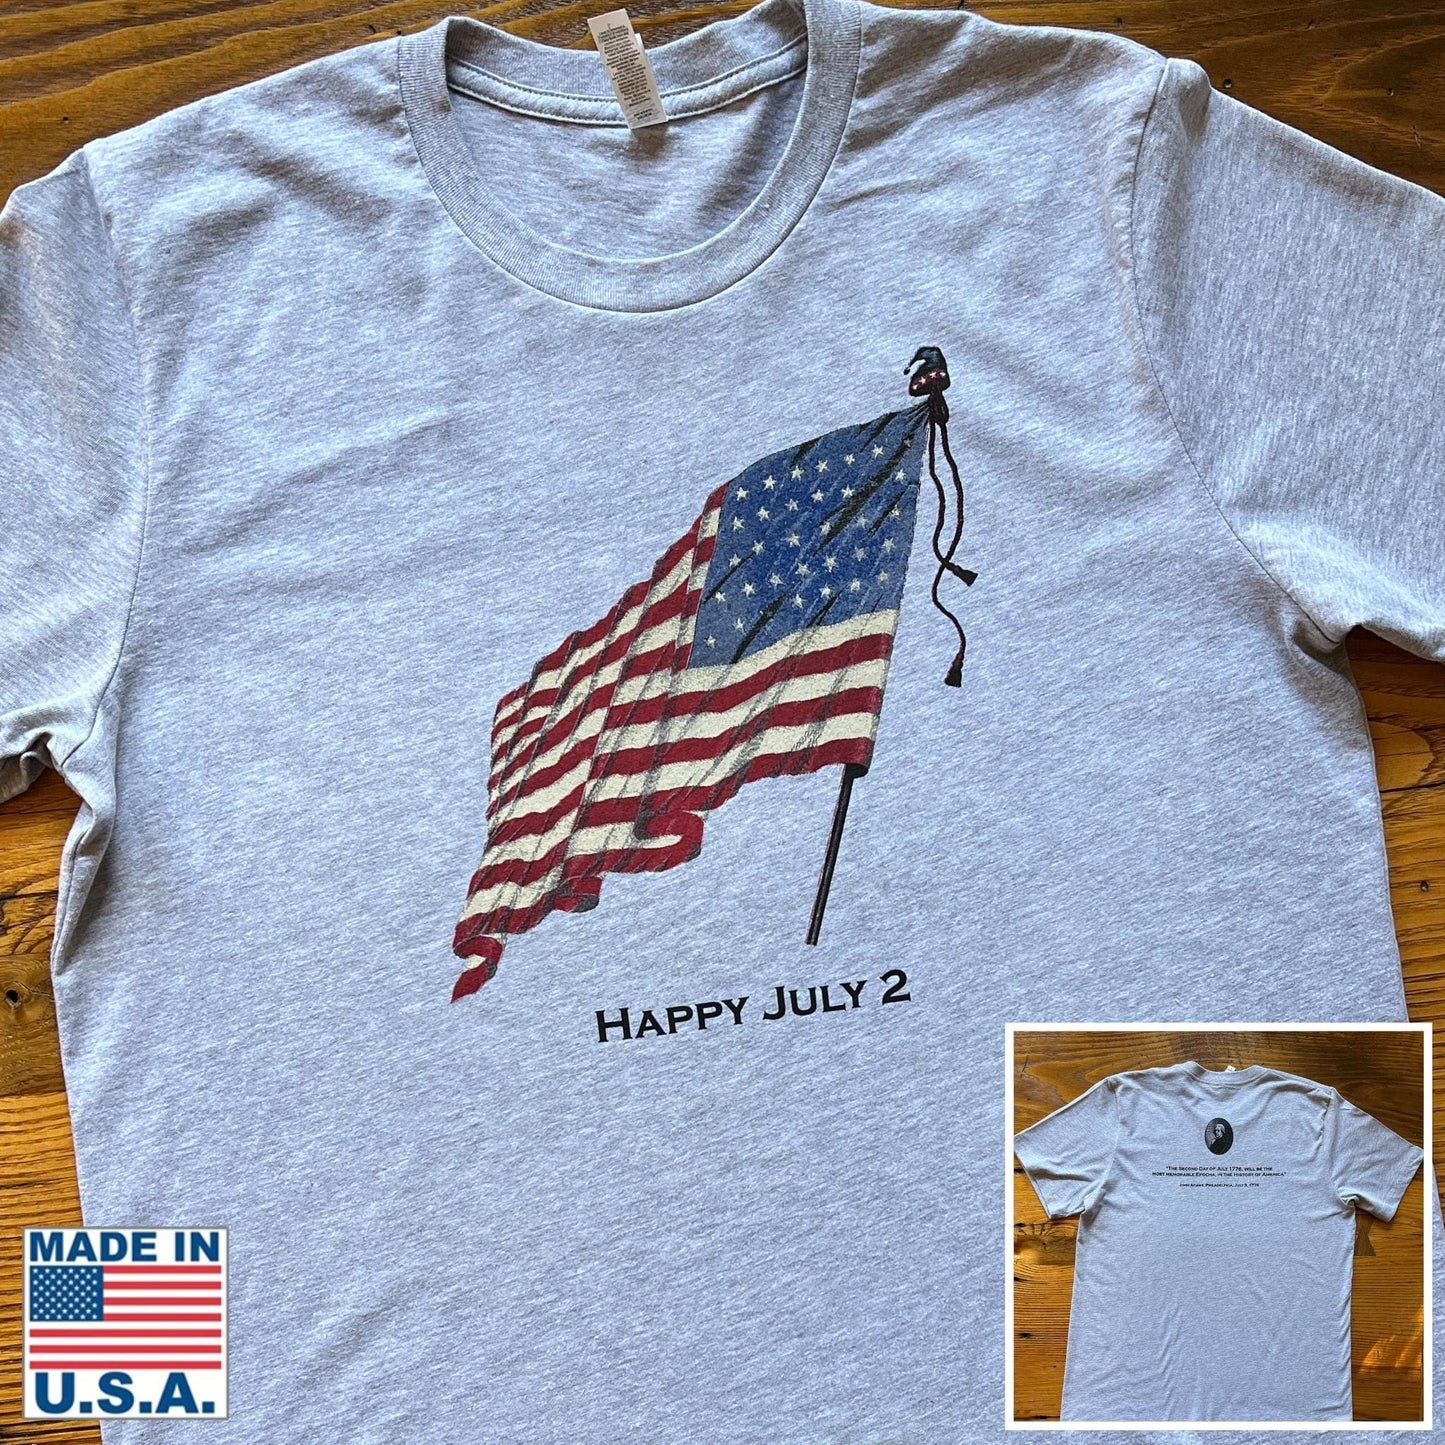 Crewneck "Happy July 2” T-shirt with John Adams and his quote on the back gift from the history list store